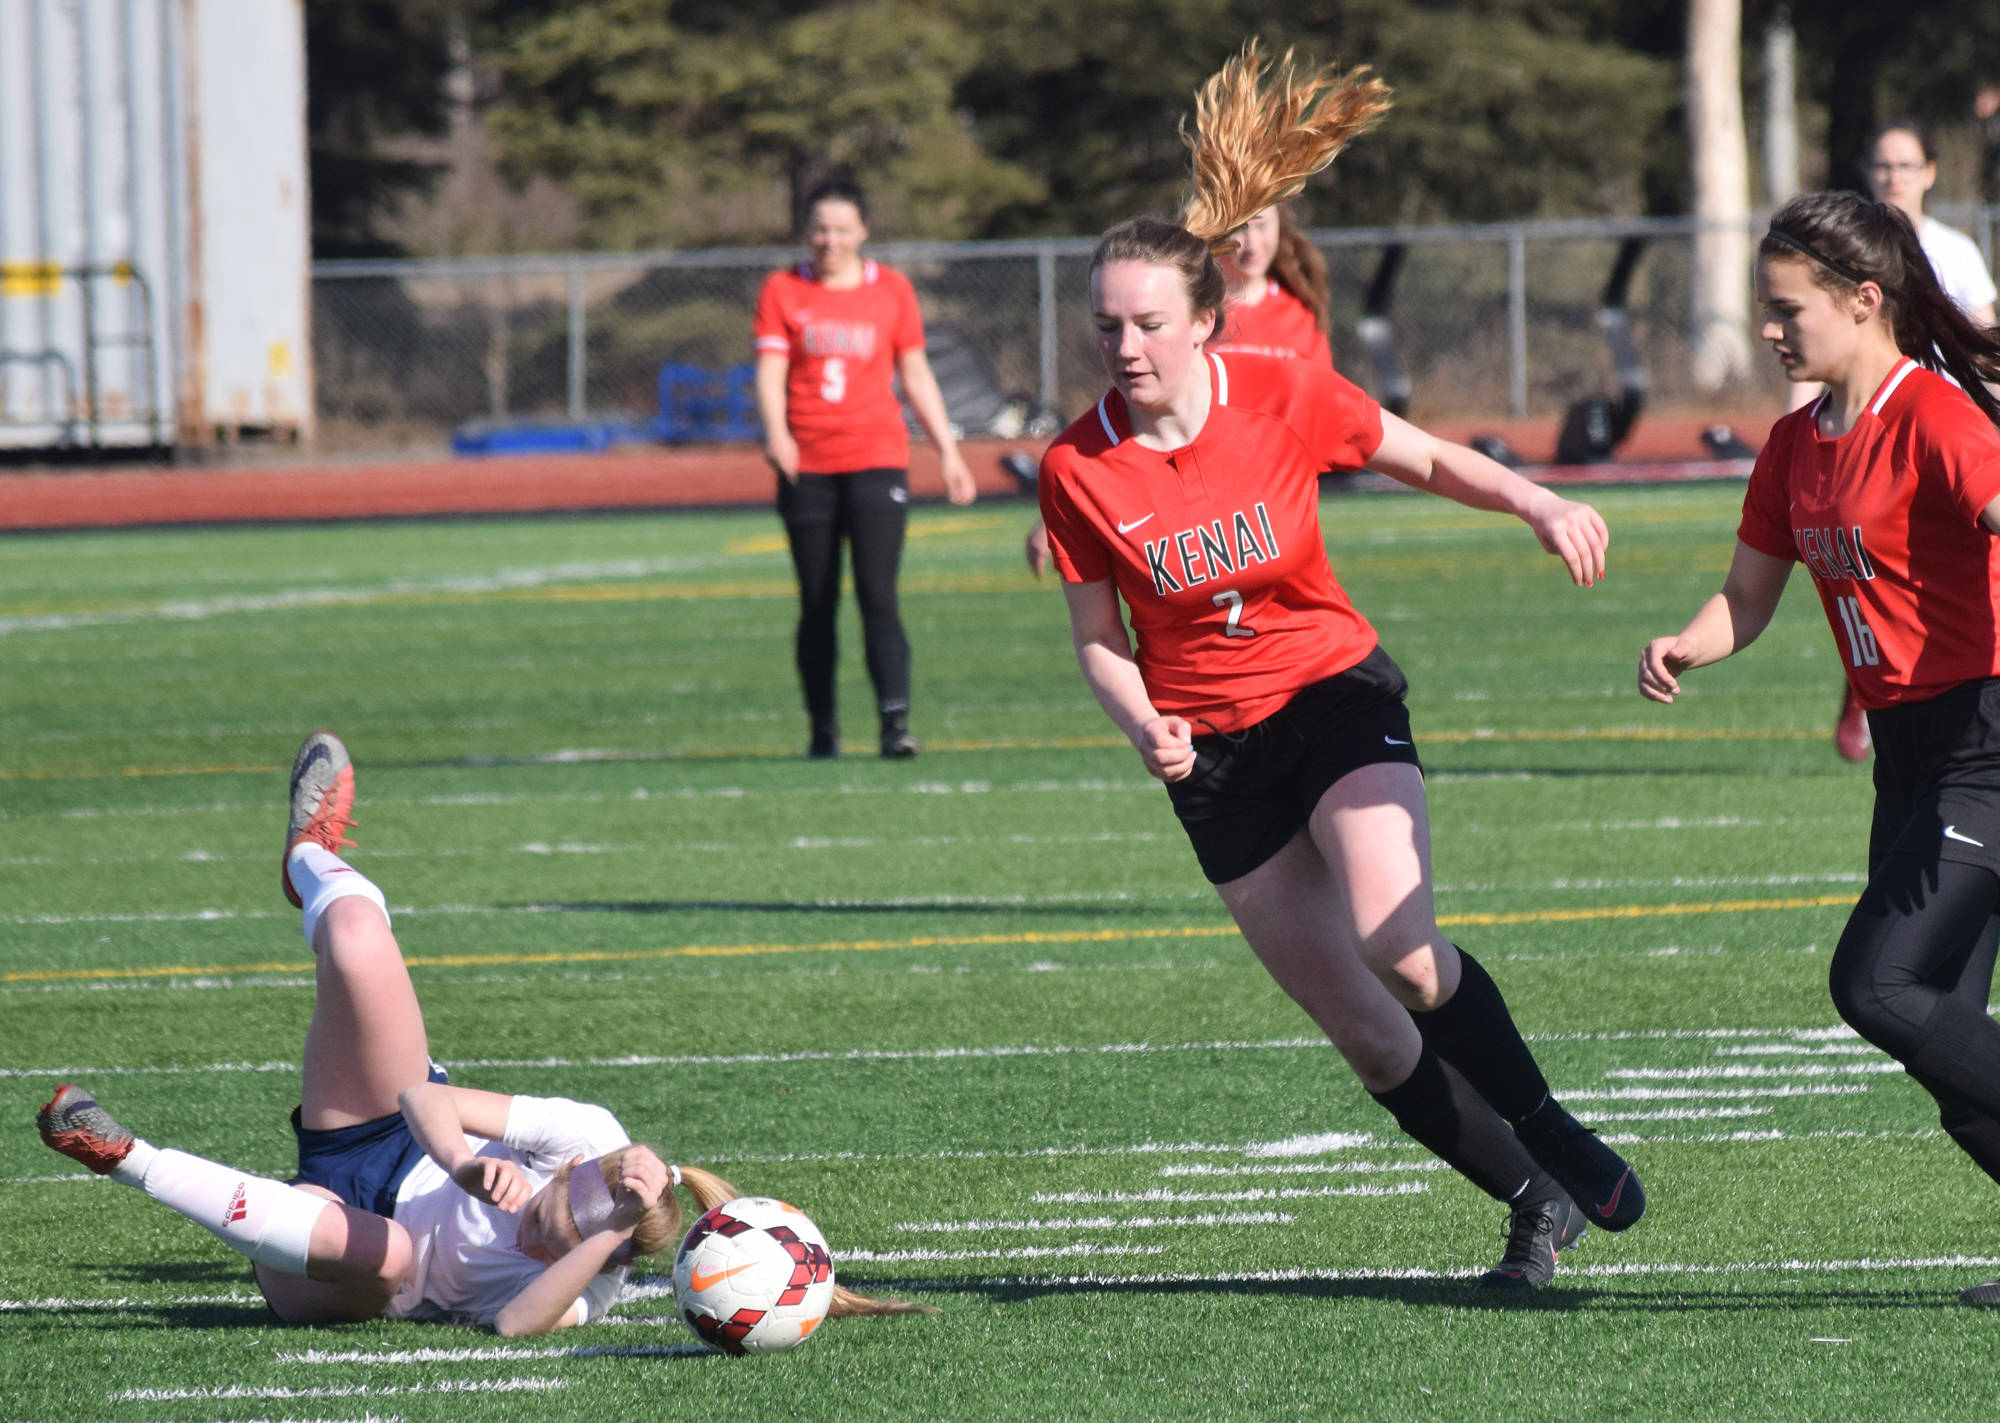 Kenai’s Bethany Morris (right) evades a falling North Pole player Saturday, April 13, 2019, in a nonconference game at Kenai Central High School. (Photo by Joey Klecka/Peninsula Clarion)